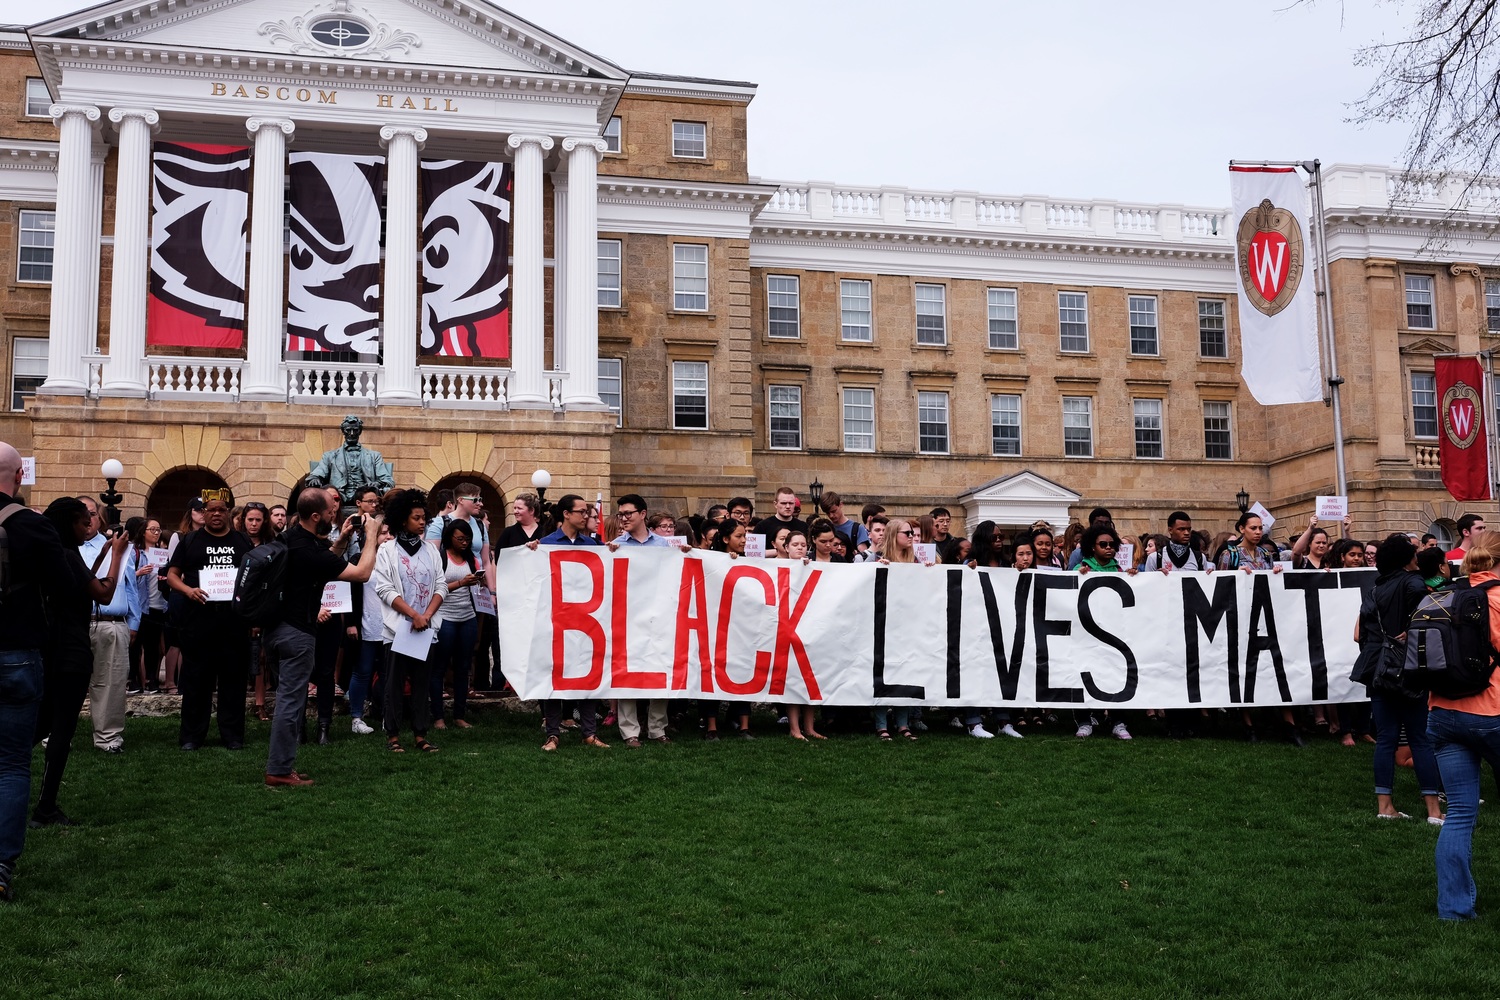 Gathering at Bascom Hall, seat of the University’s administration.